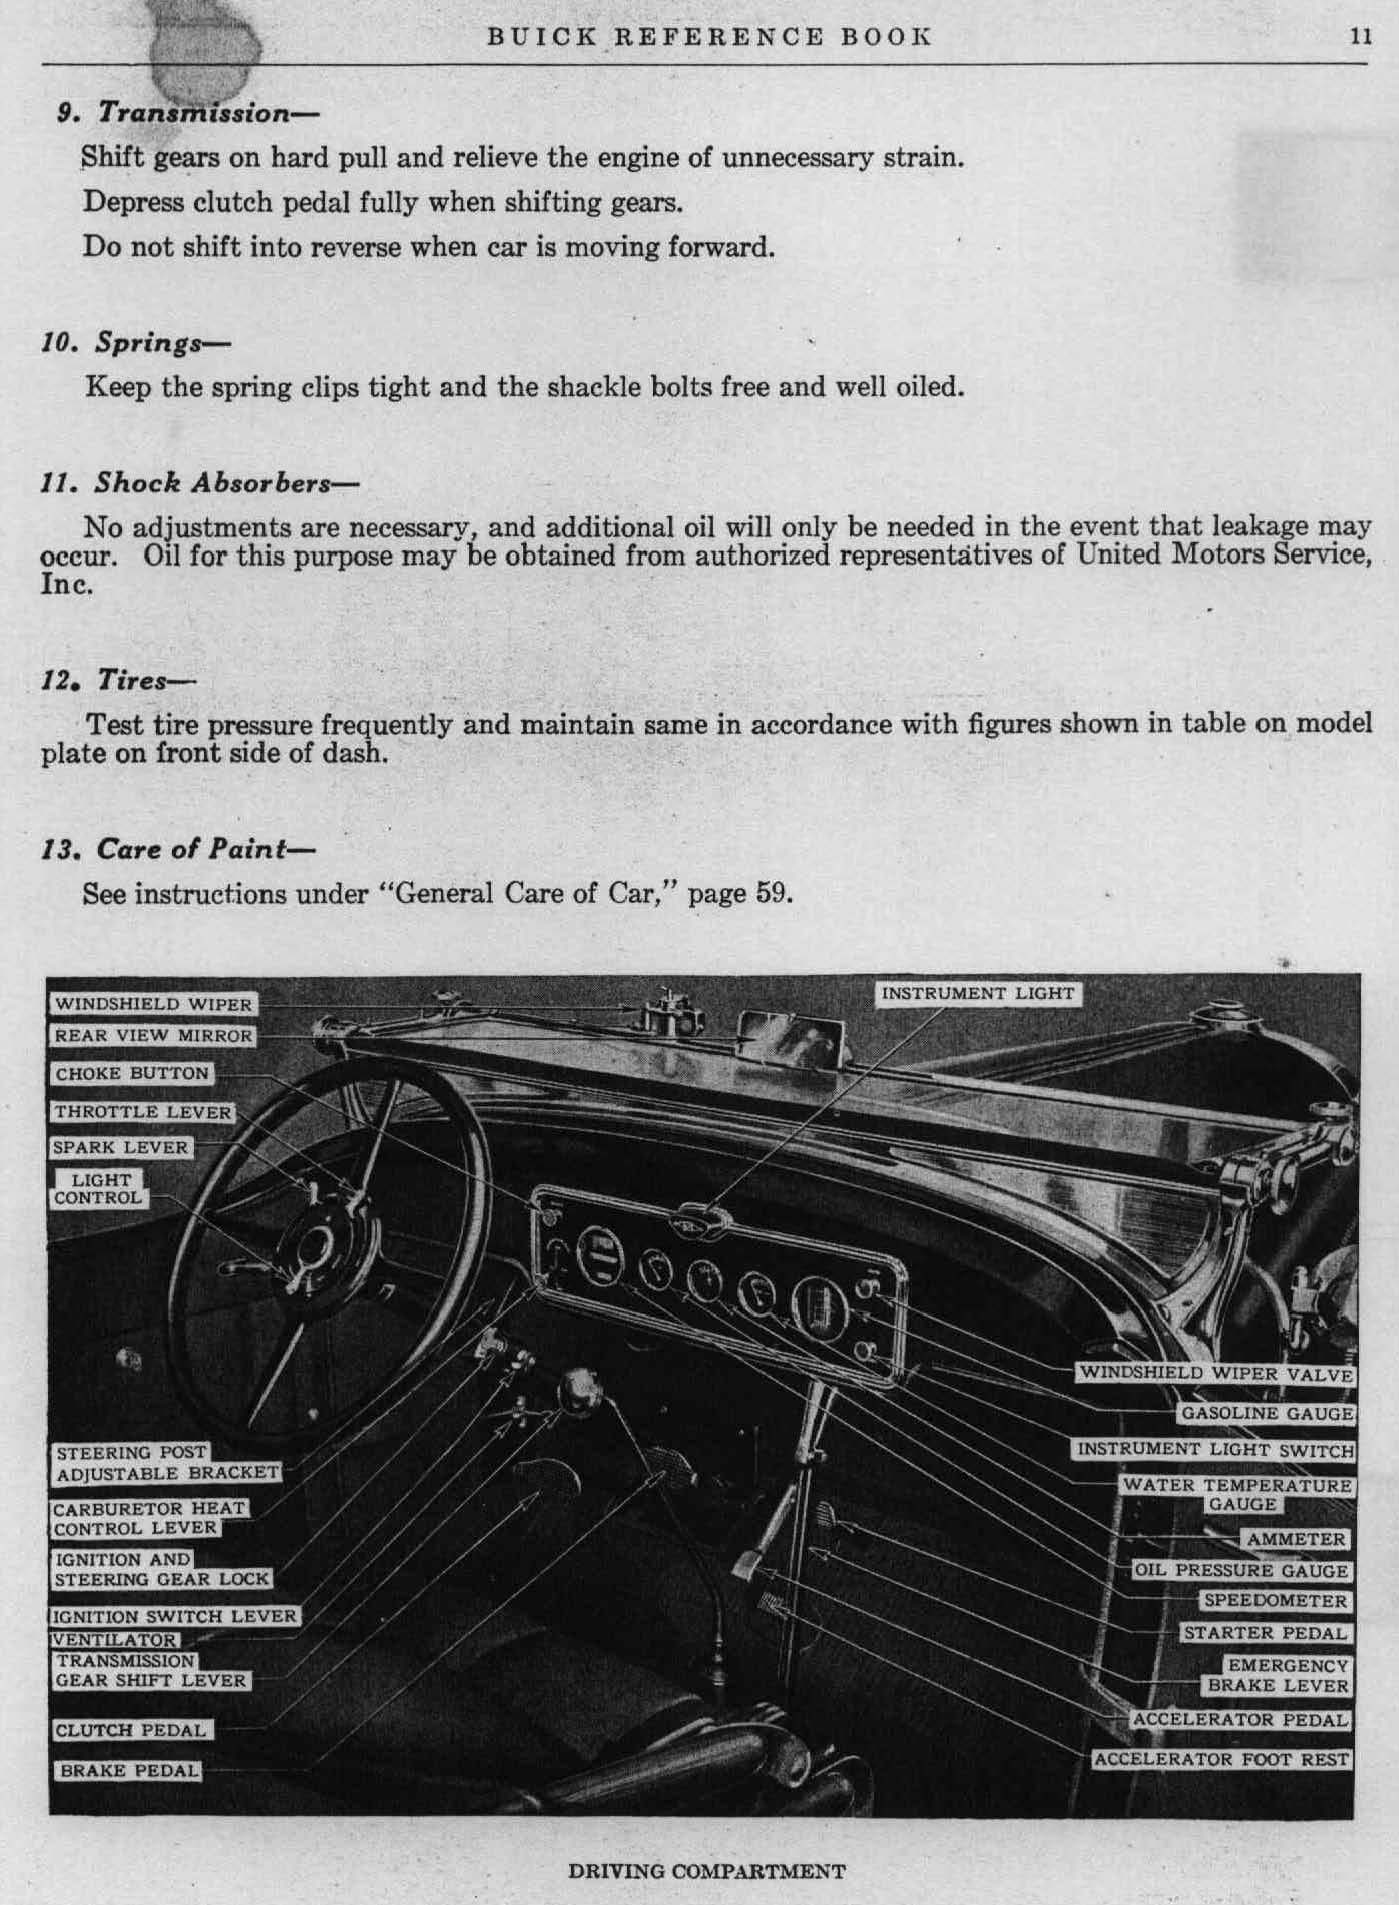 1929 Buick Reference Book-12